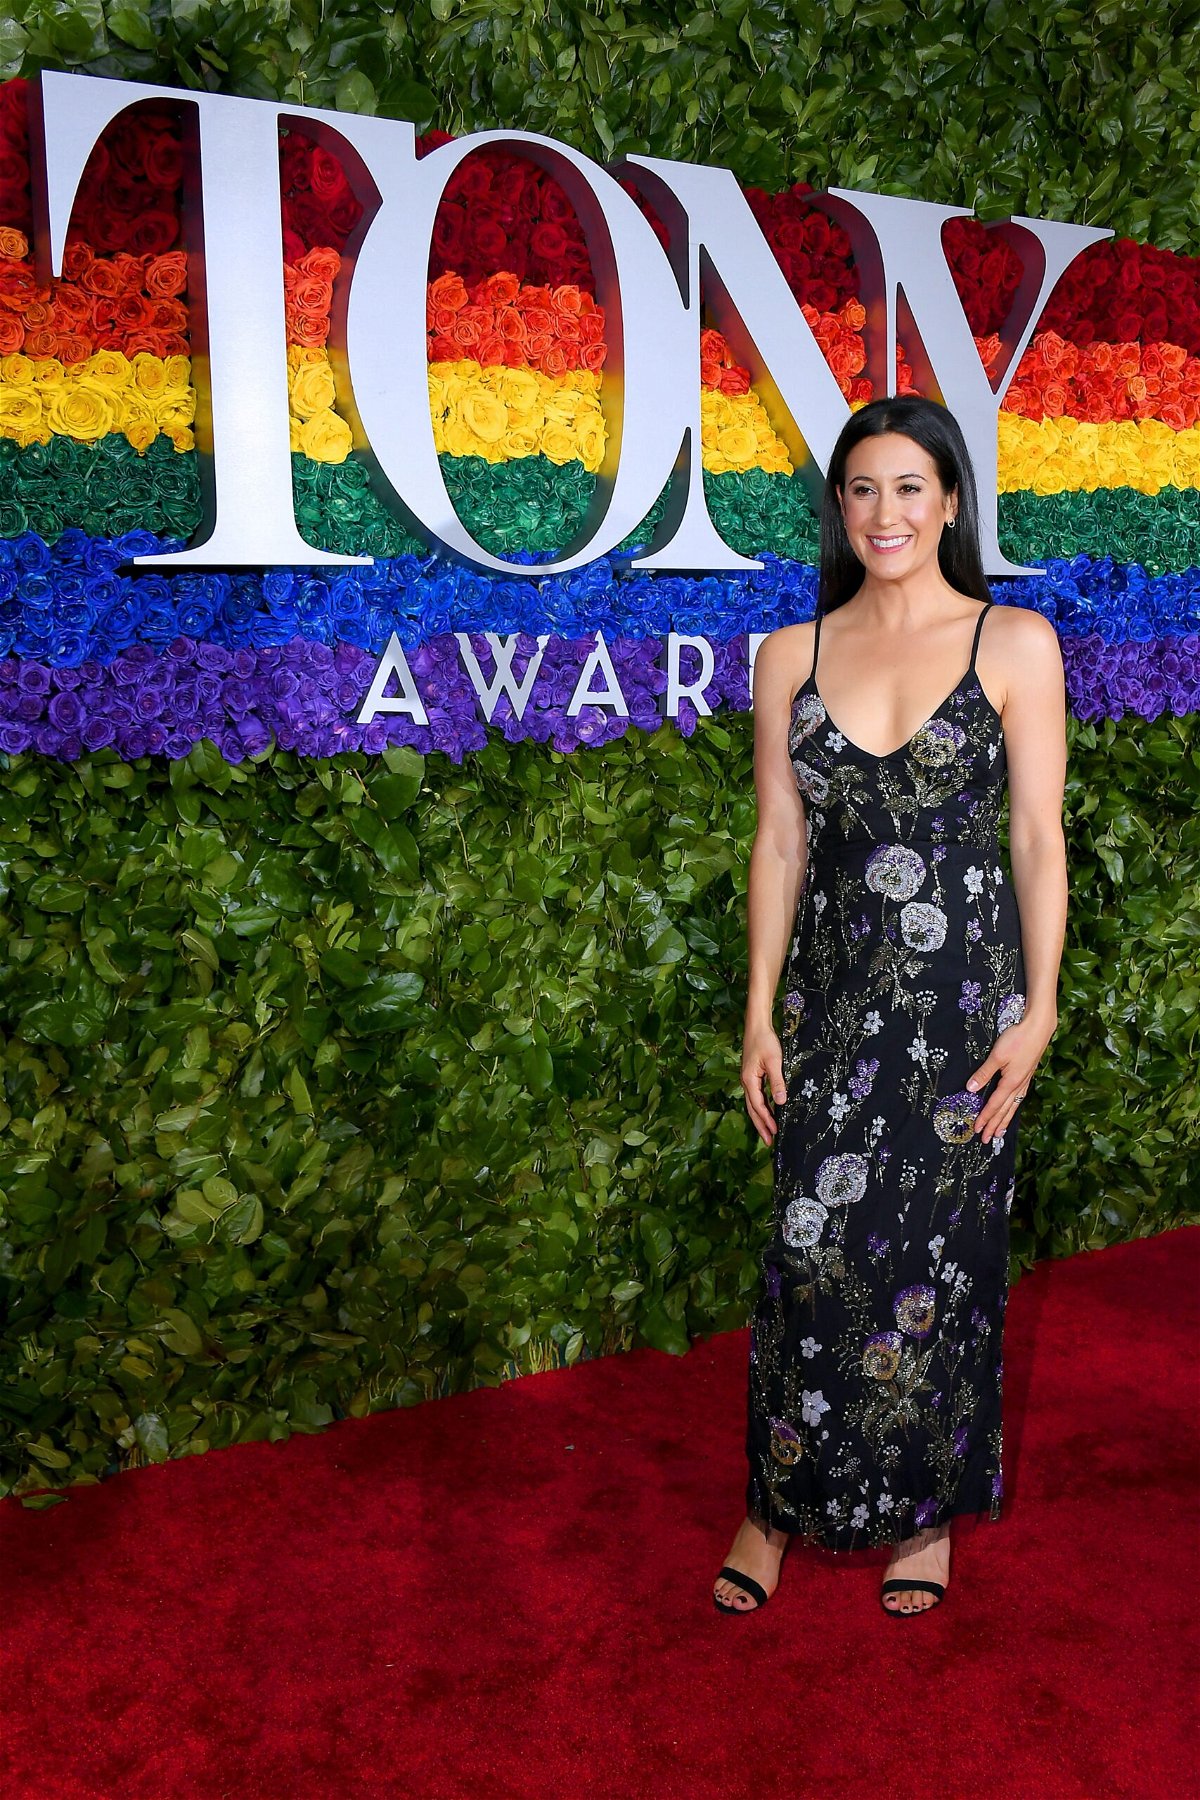 Vanessa Carlton attends the 73rd Annual Tony Awards at Radio City Music Hall on June 09, 2019 in New York City.